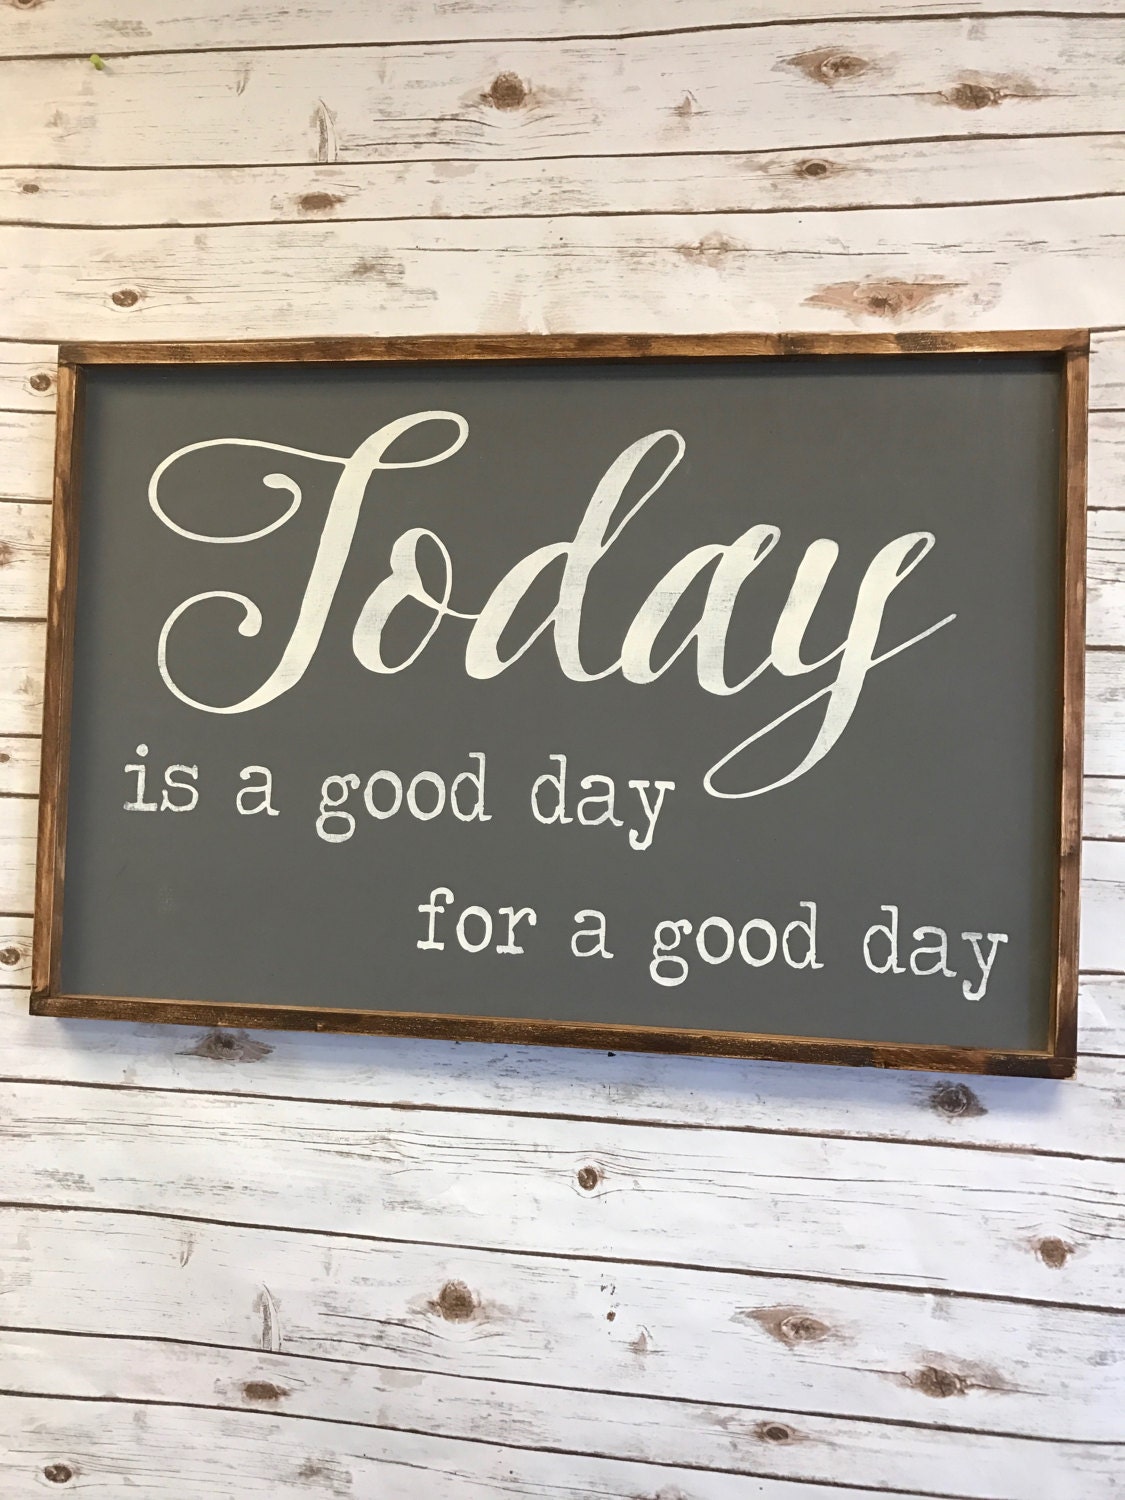 Today is a good day for a good day wood sign farmhouse sign